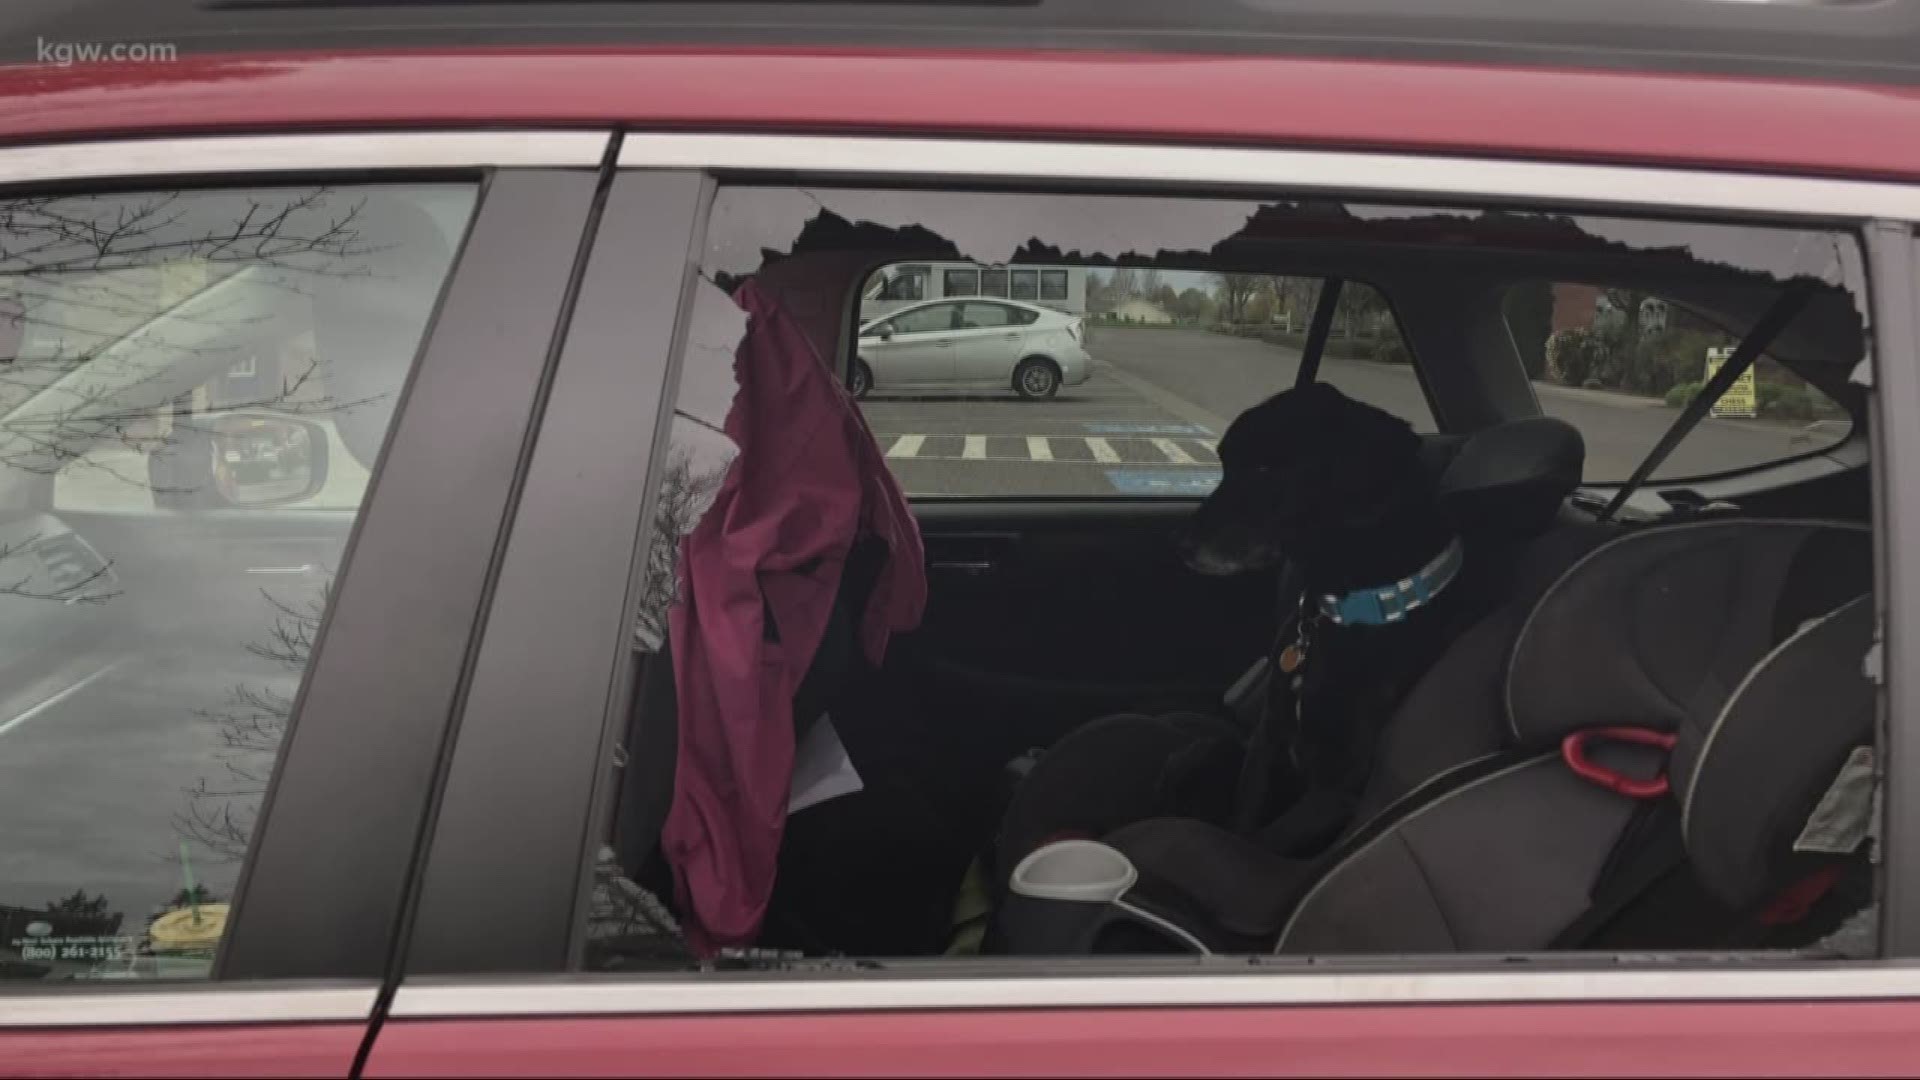 Vancouver police are warning people to take valuables out of their vehicles after a string of smash and grabs.